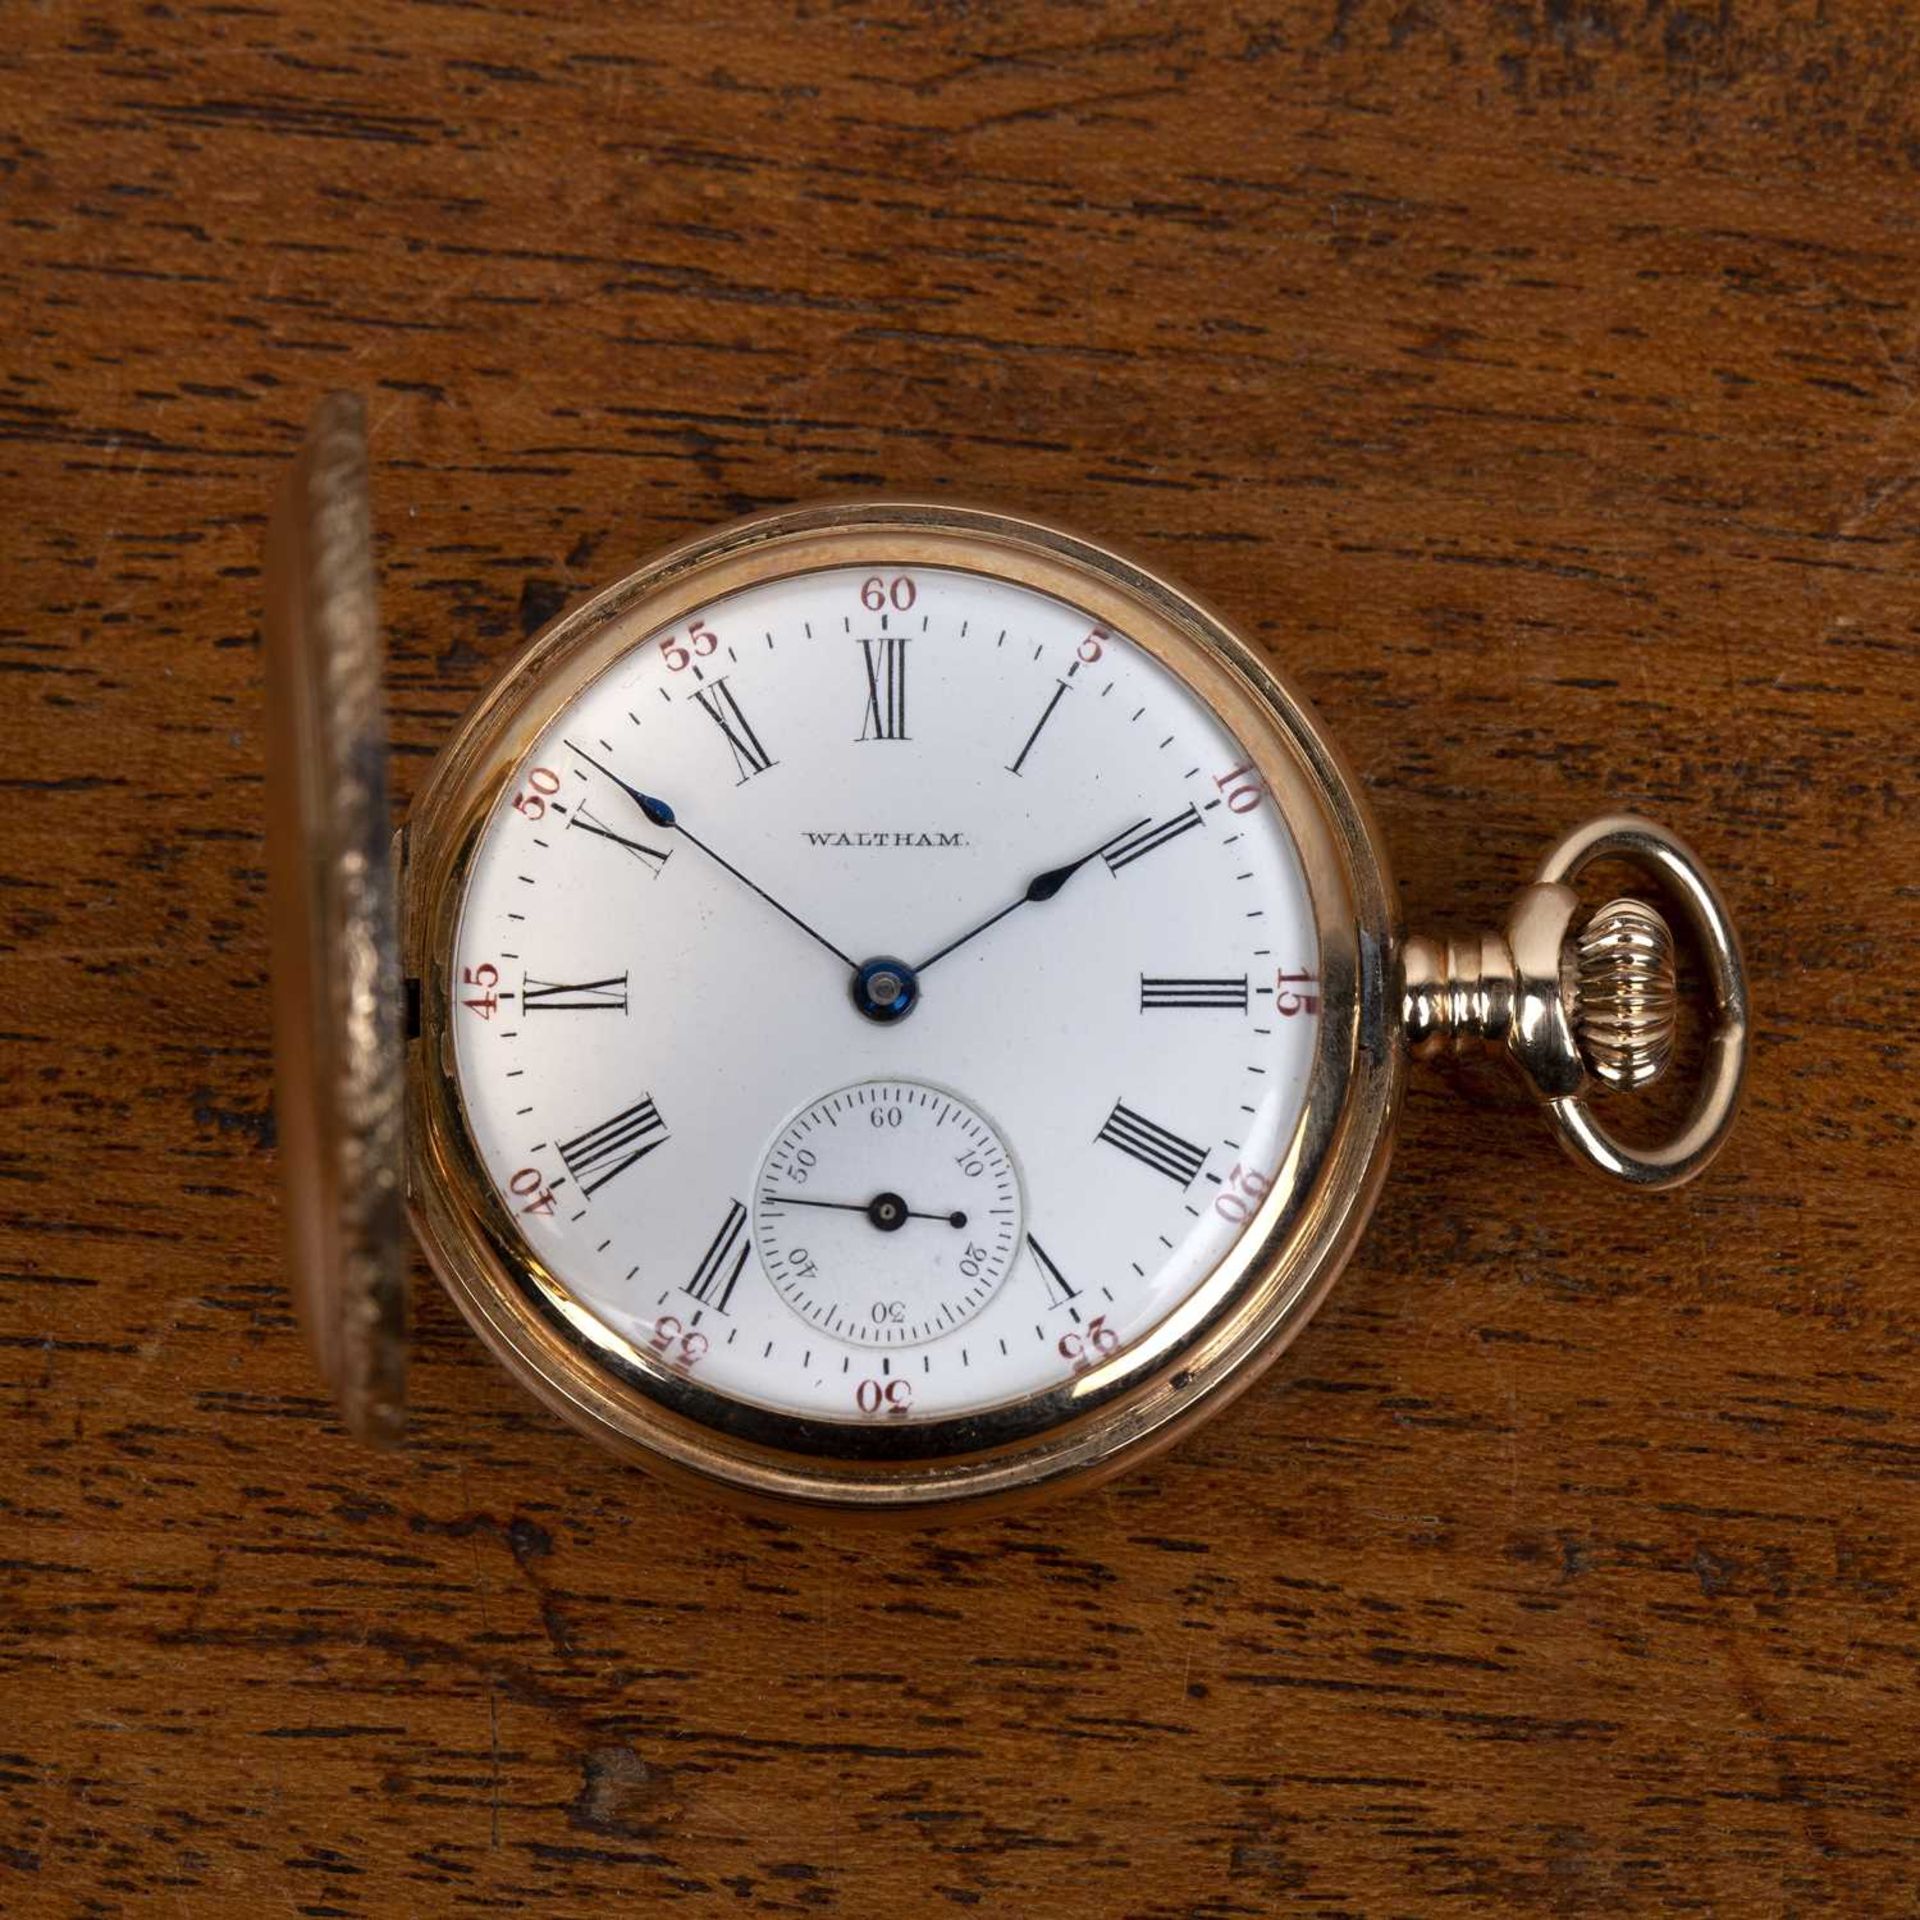 14k gold cased Waltham full hunter pocket watch the cover concealing a white enamel dial with